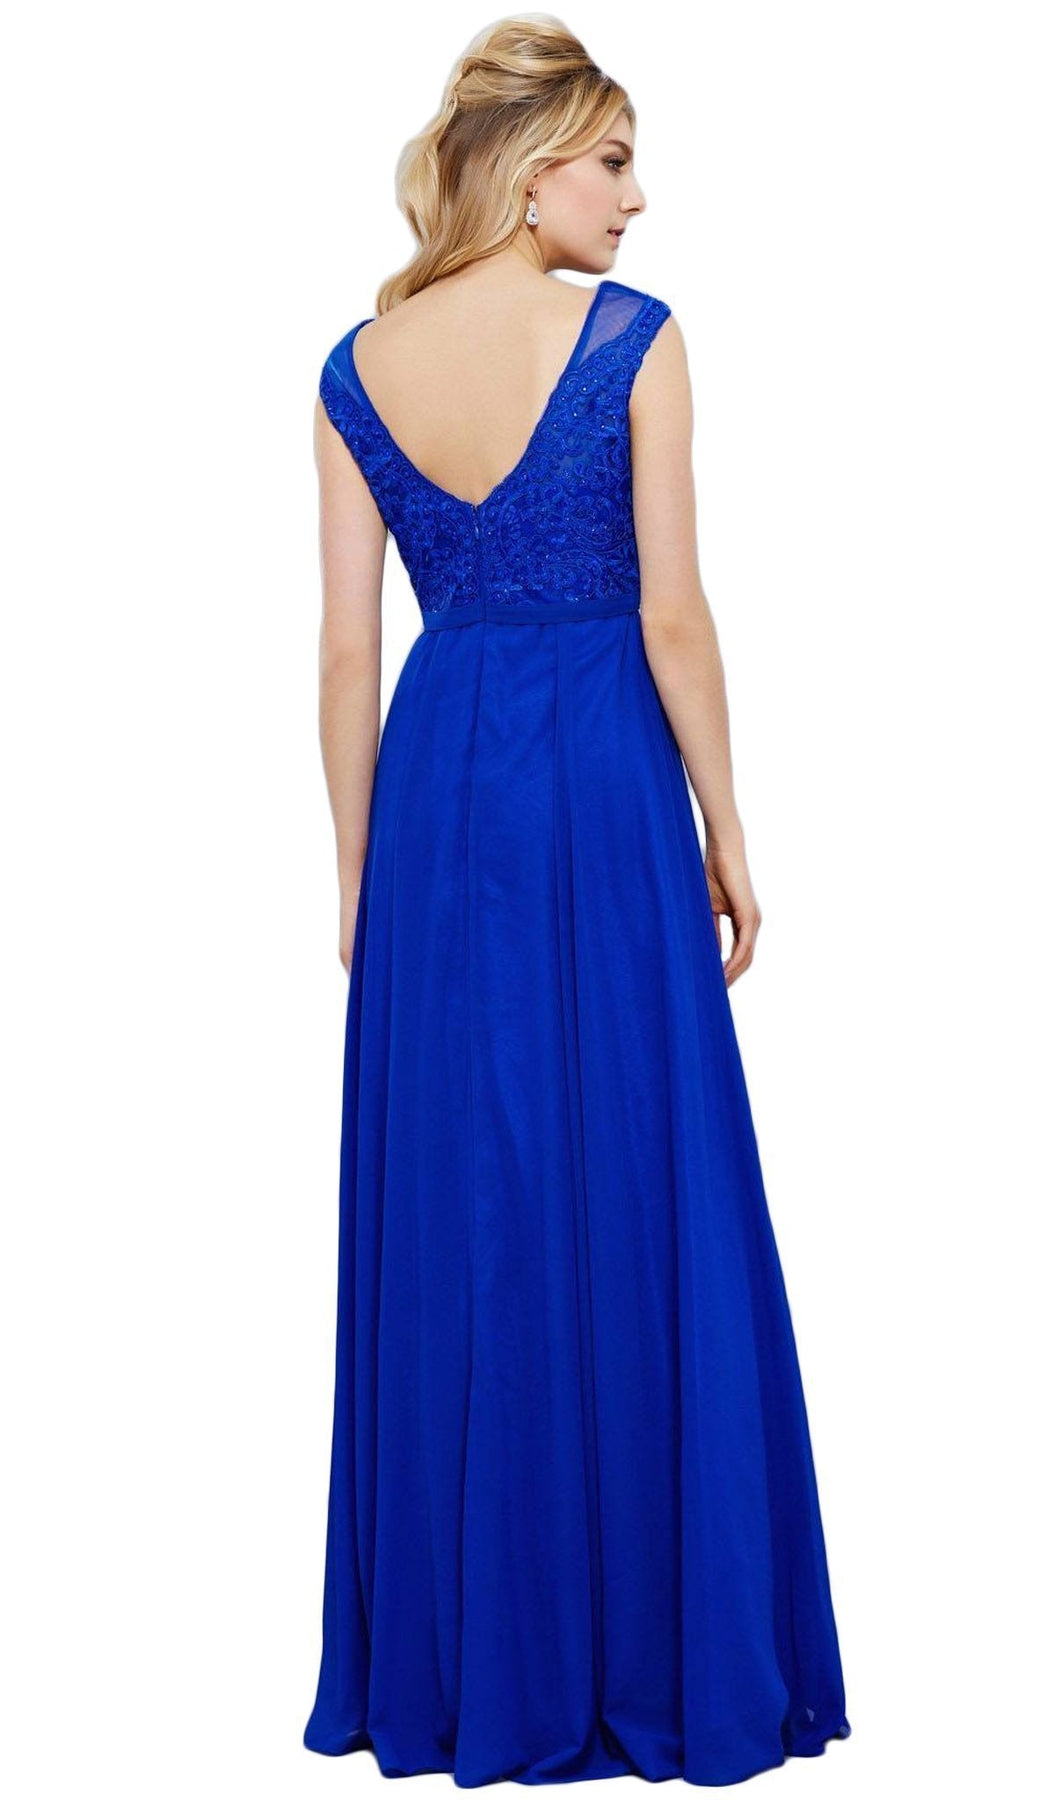 Nox Anabel - 8314 Elegant Lace Bodice Scoop Back Chiffon A-Line Evening Gown Special Occasion Dress